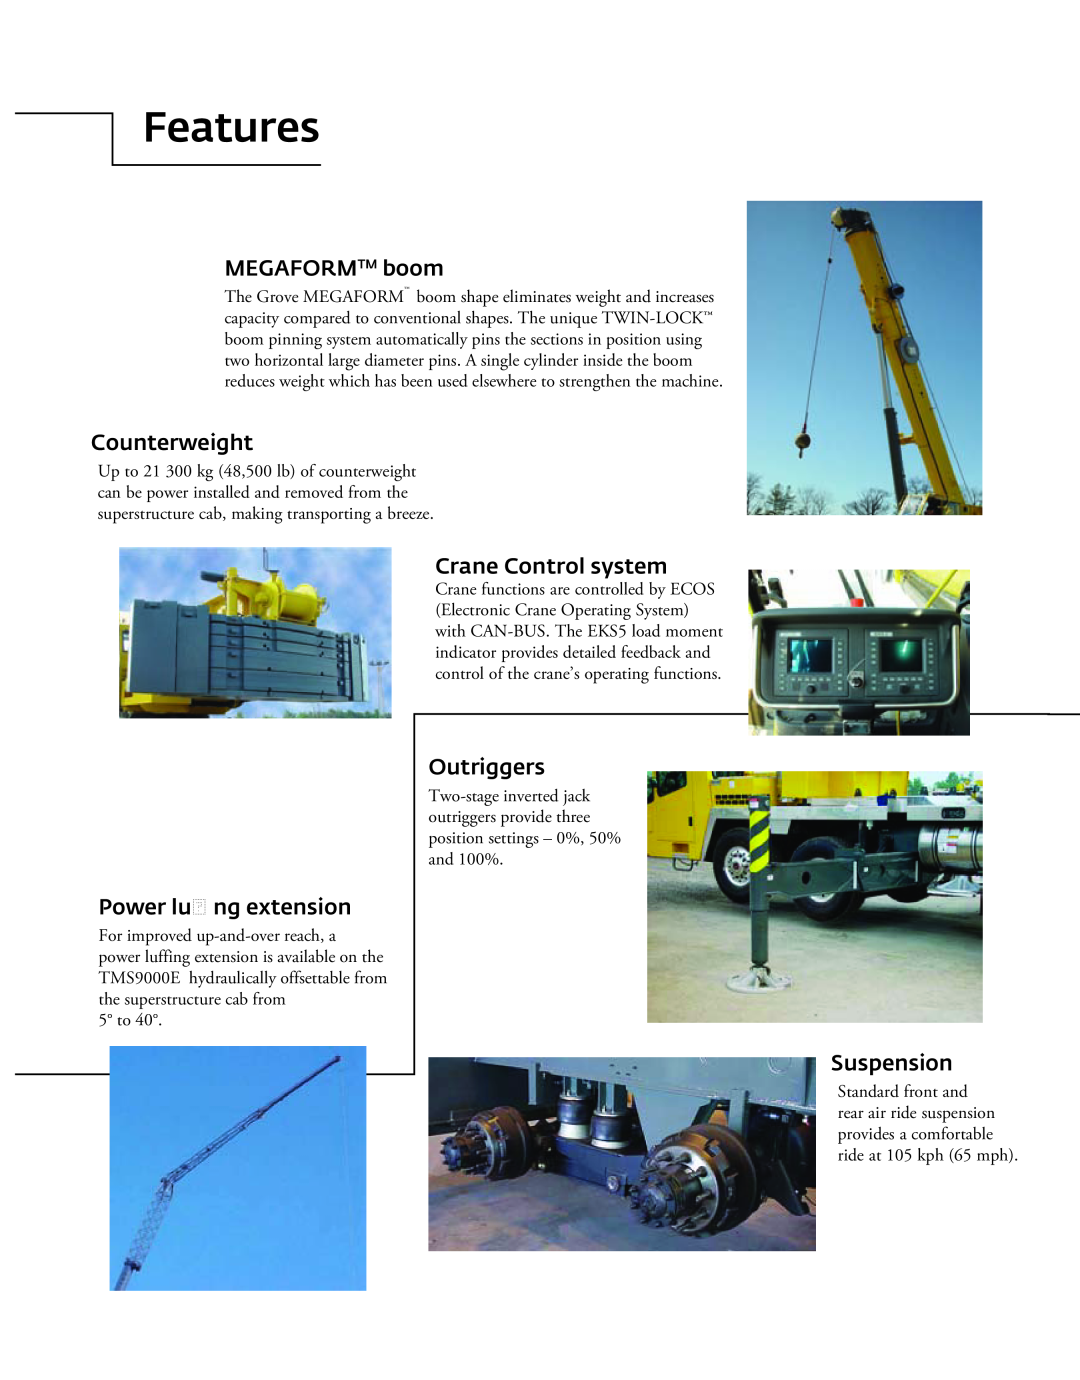 Manitowoc Ice TMS9000E Features, MEGAFORMTM boom, Counterweight, Crane Control system, Power luffing extension, Outriggers 